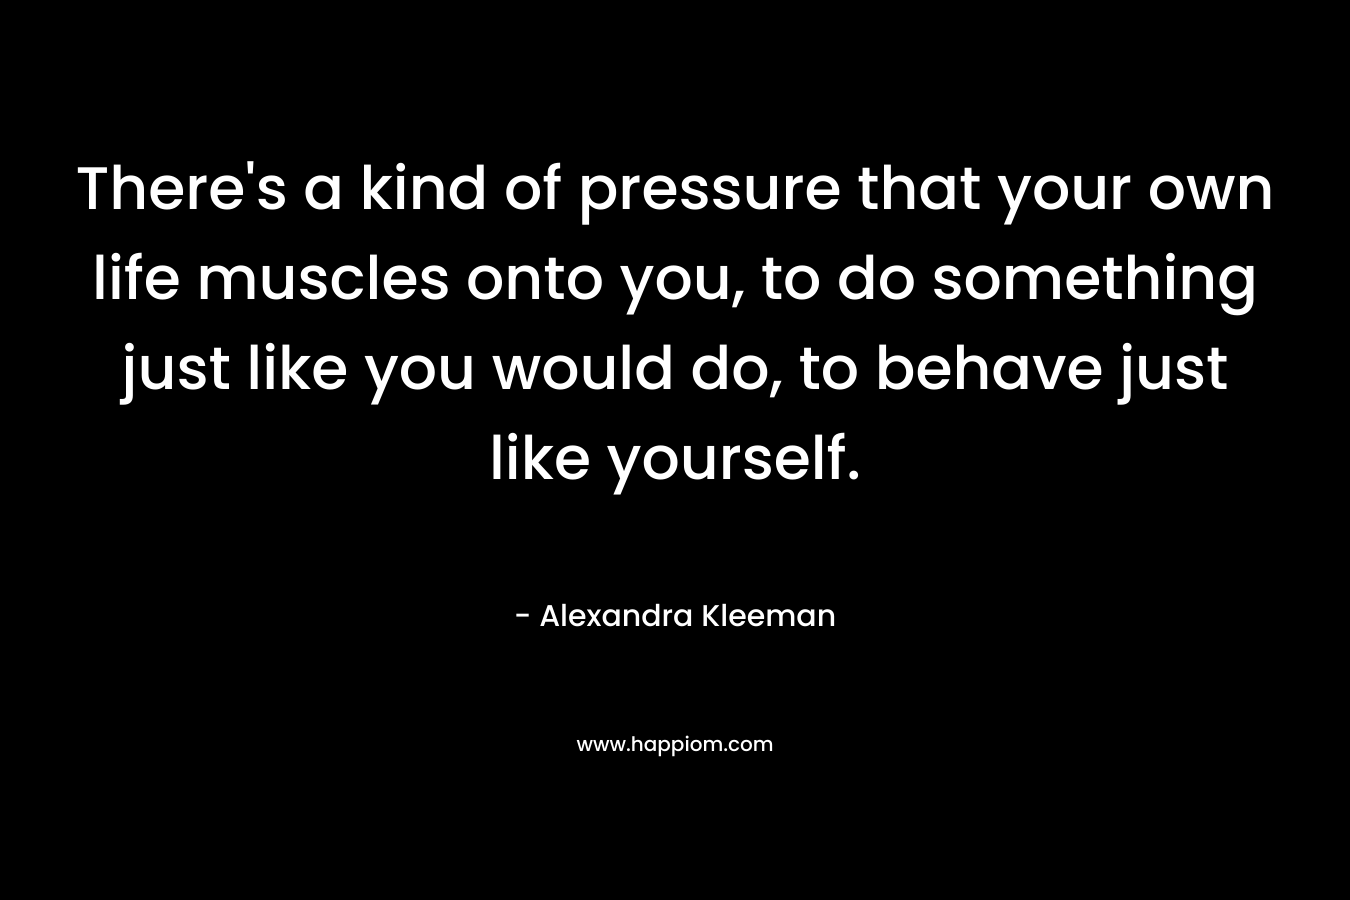 There's a kind of pressure that your own life muscles onto you, to do something just like you would do, to behave just like yourself.